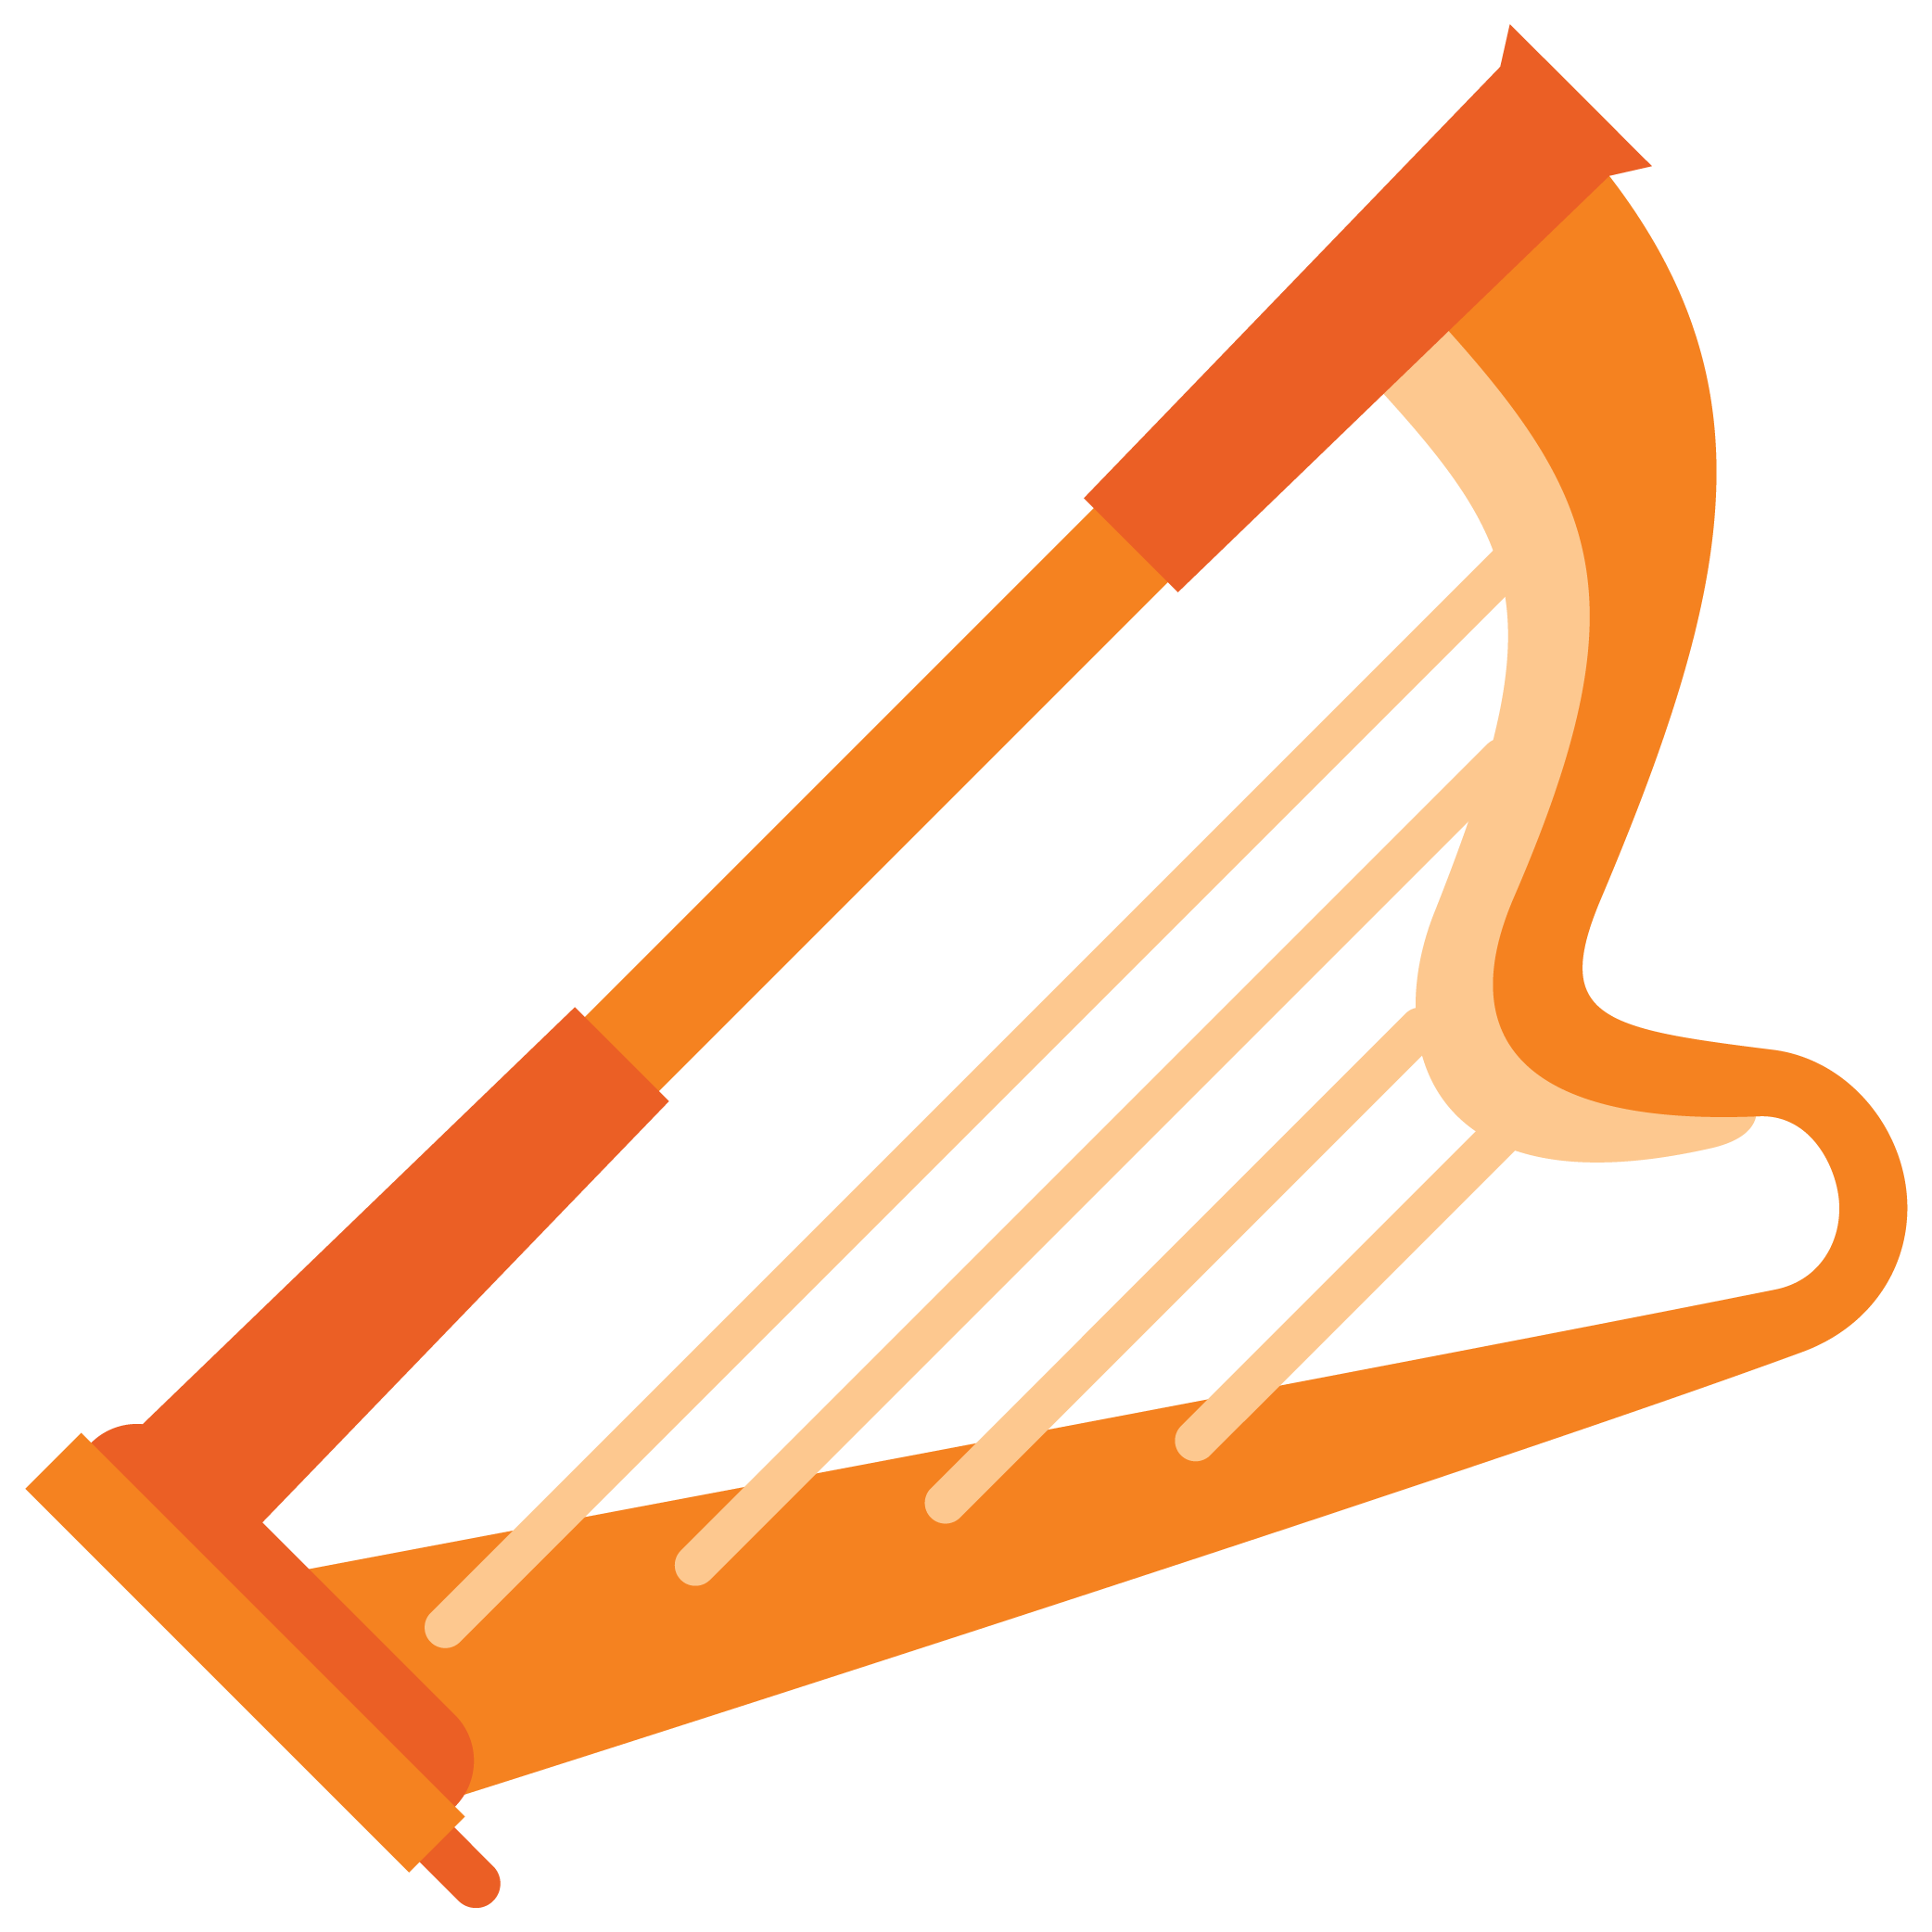 harp lessons and classes online